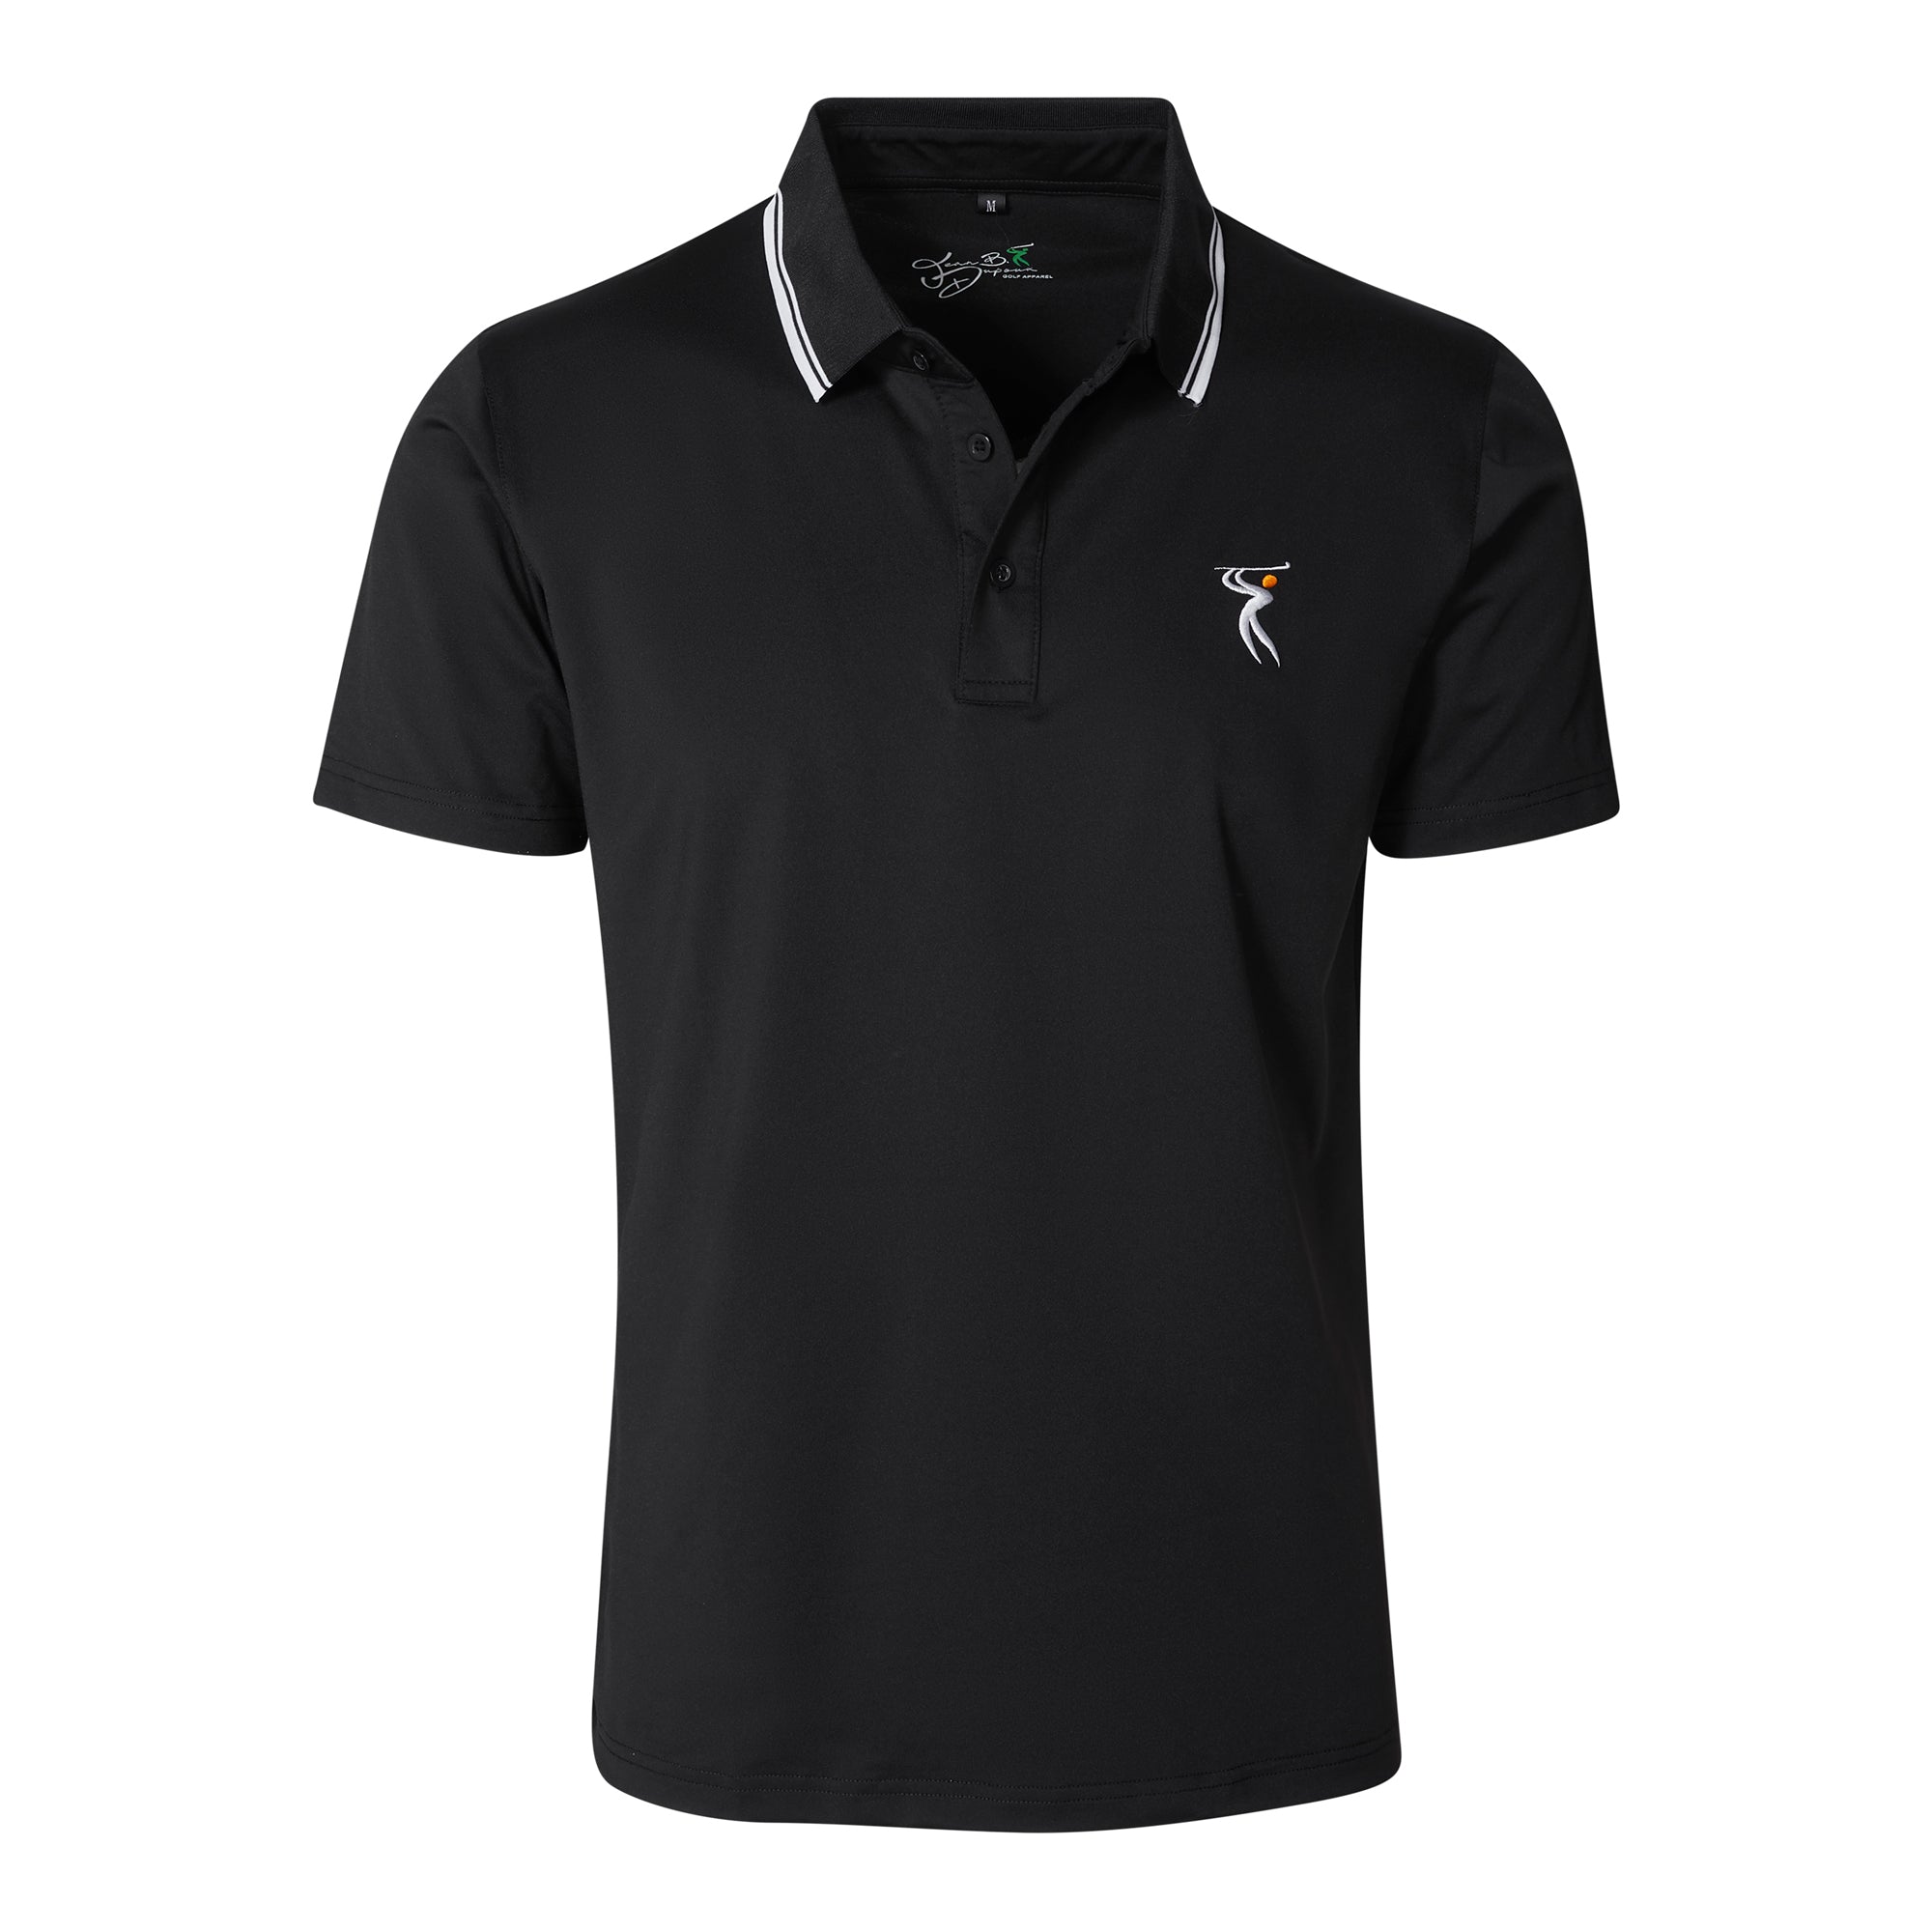 Style-7255 New Fall 2022/2023 Classic Short Sleeve Mens Golf Shirts with  Free Golf Hat , Free Golf Leather Gloves| 88% Polyester and 12% Spandex